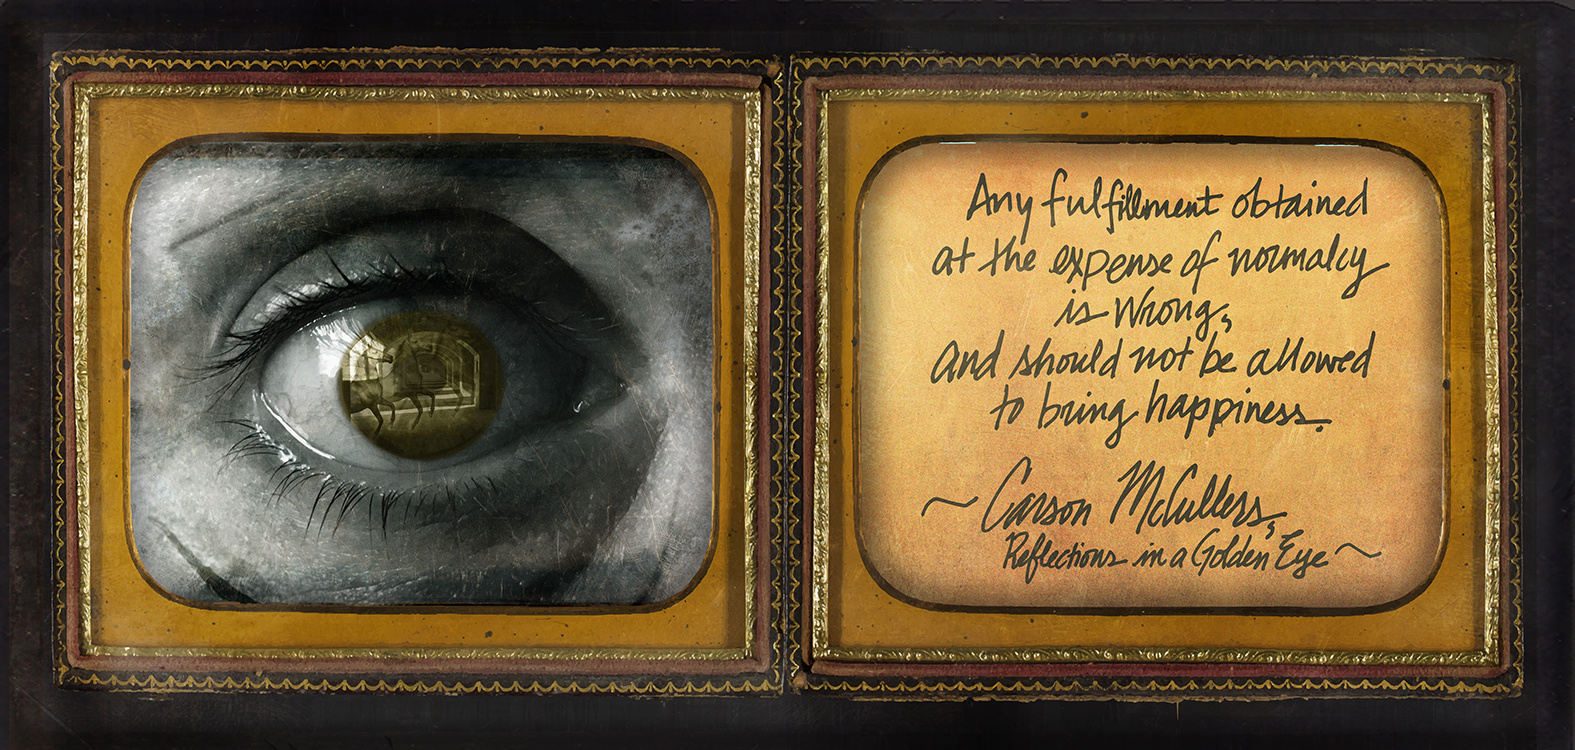 Southern Gothic Daguerreotype of Carson McCullers' "Reflections in a Golden Eye"